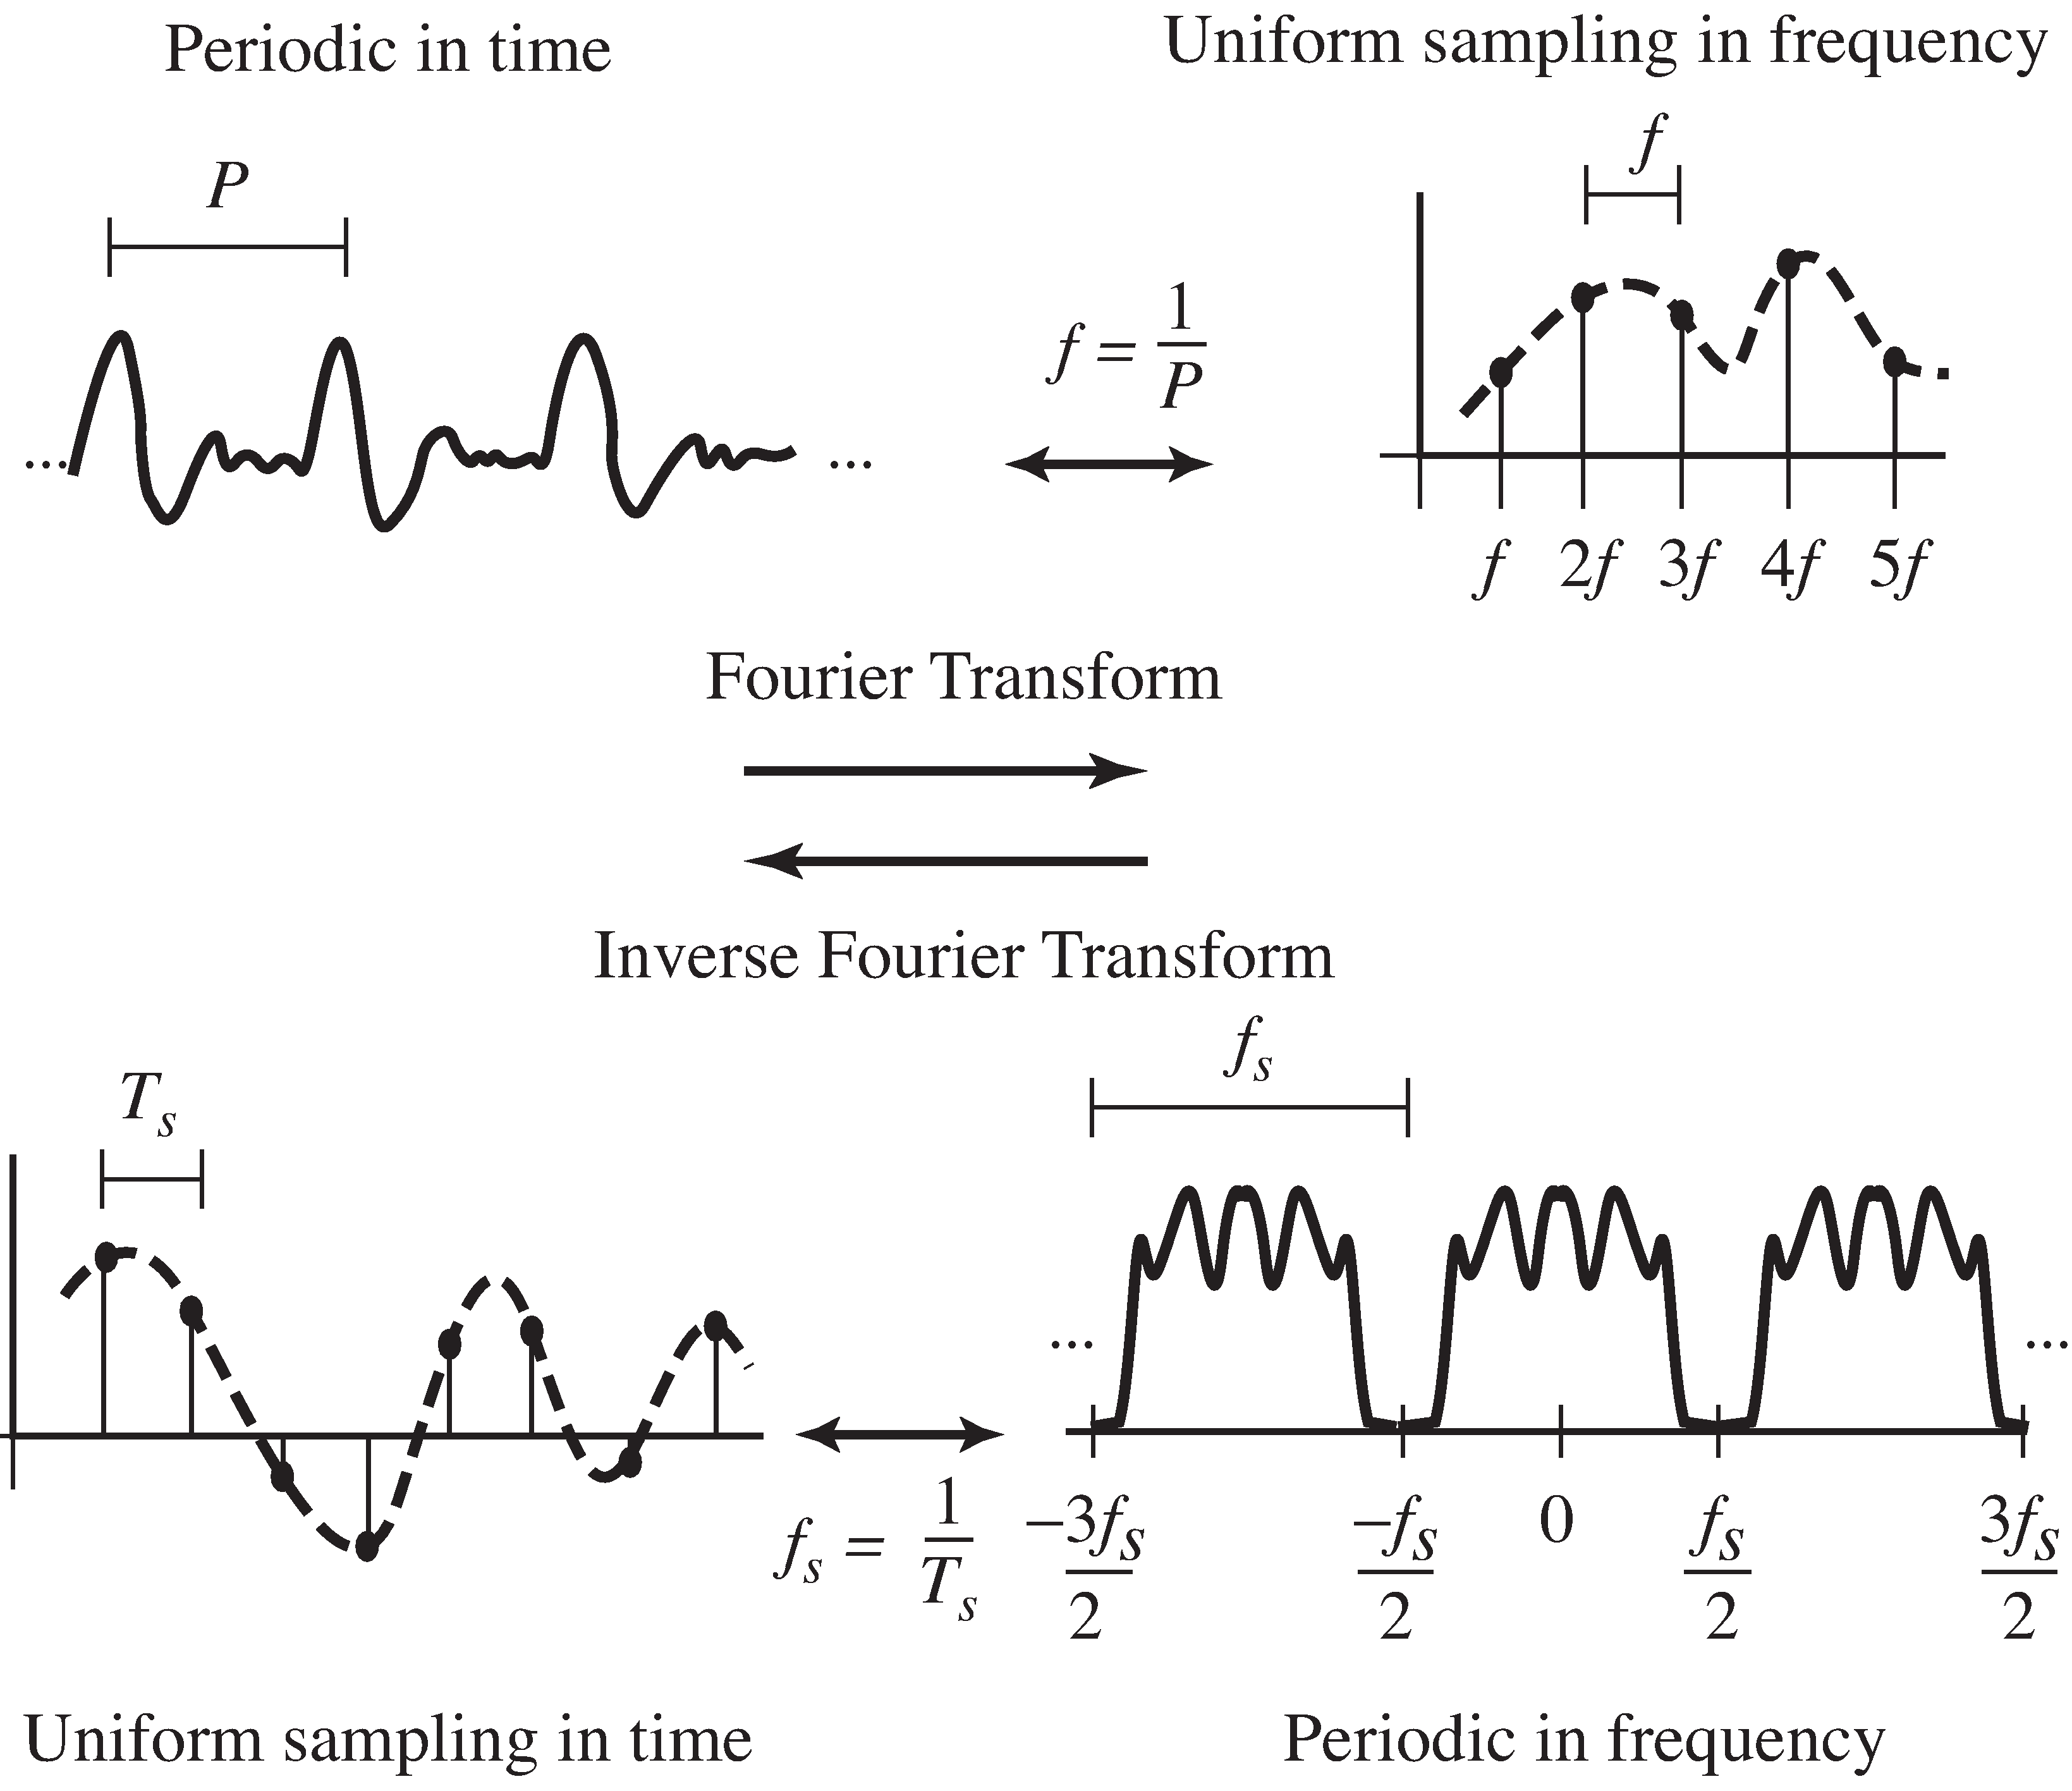 Fourier's result says that any signal that is periodic in time has a spectrum that consists of a collection of spikes uniformly spaced in frequency. Analogously, any signal whose spectrum is periodic in frequency can be represented in time as a collection of spikes uniformly spaced in time, and vice versa.